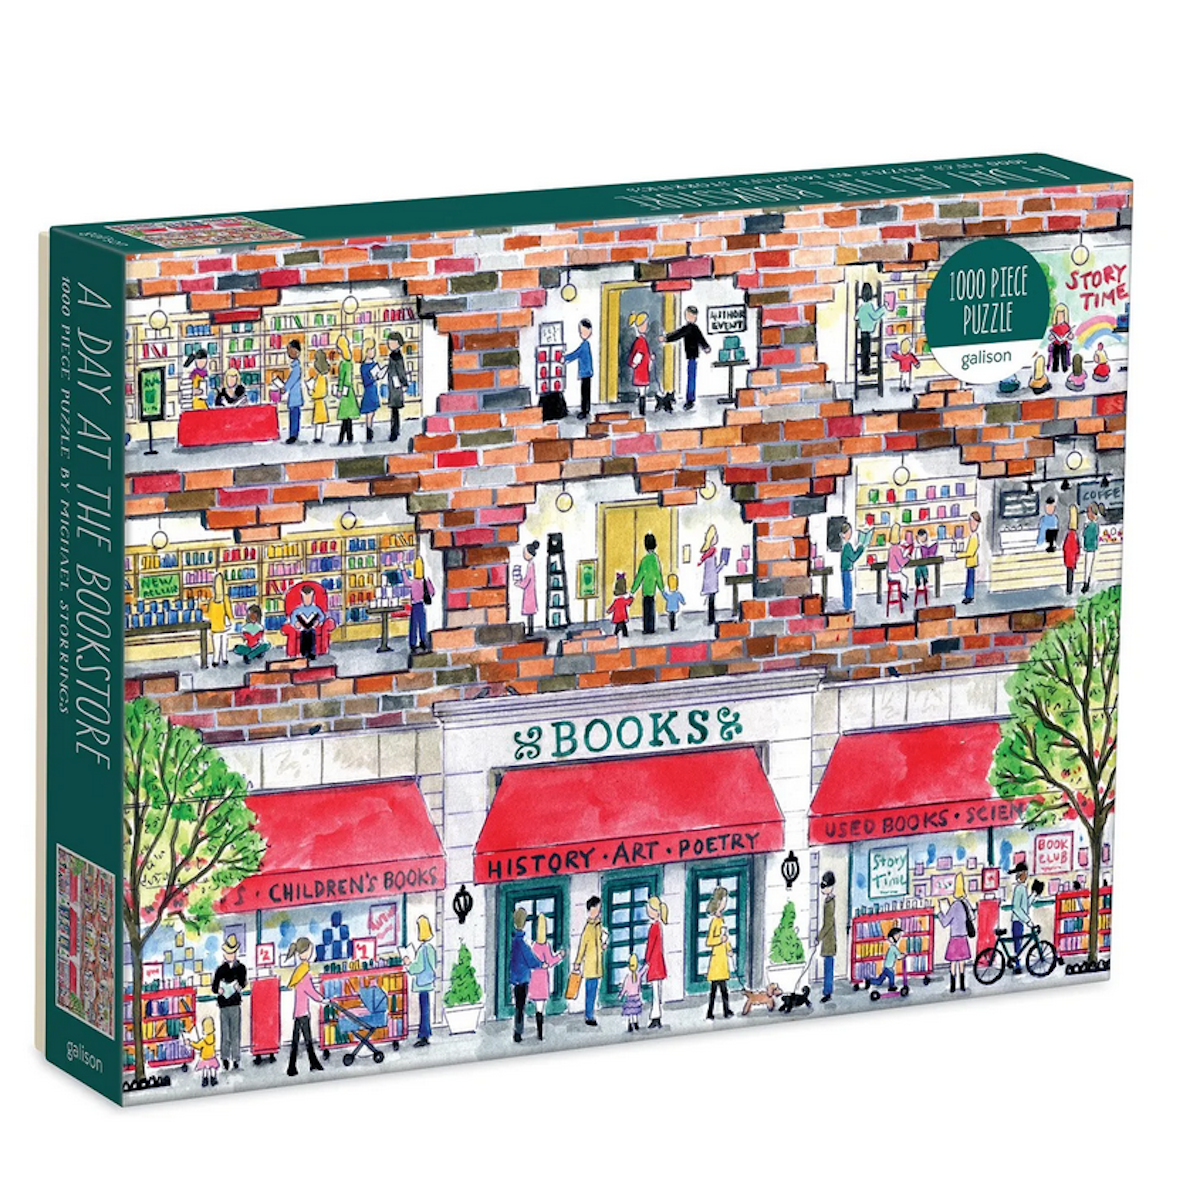 A Day At the Bookstore M. Storrings Galison Puzzle 1000pc